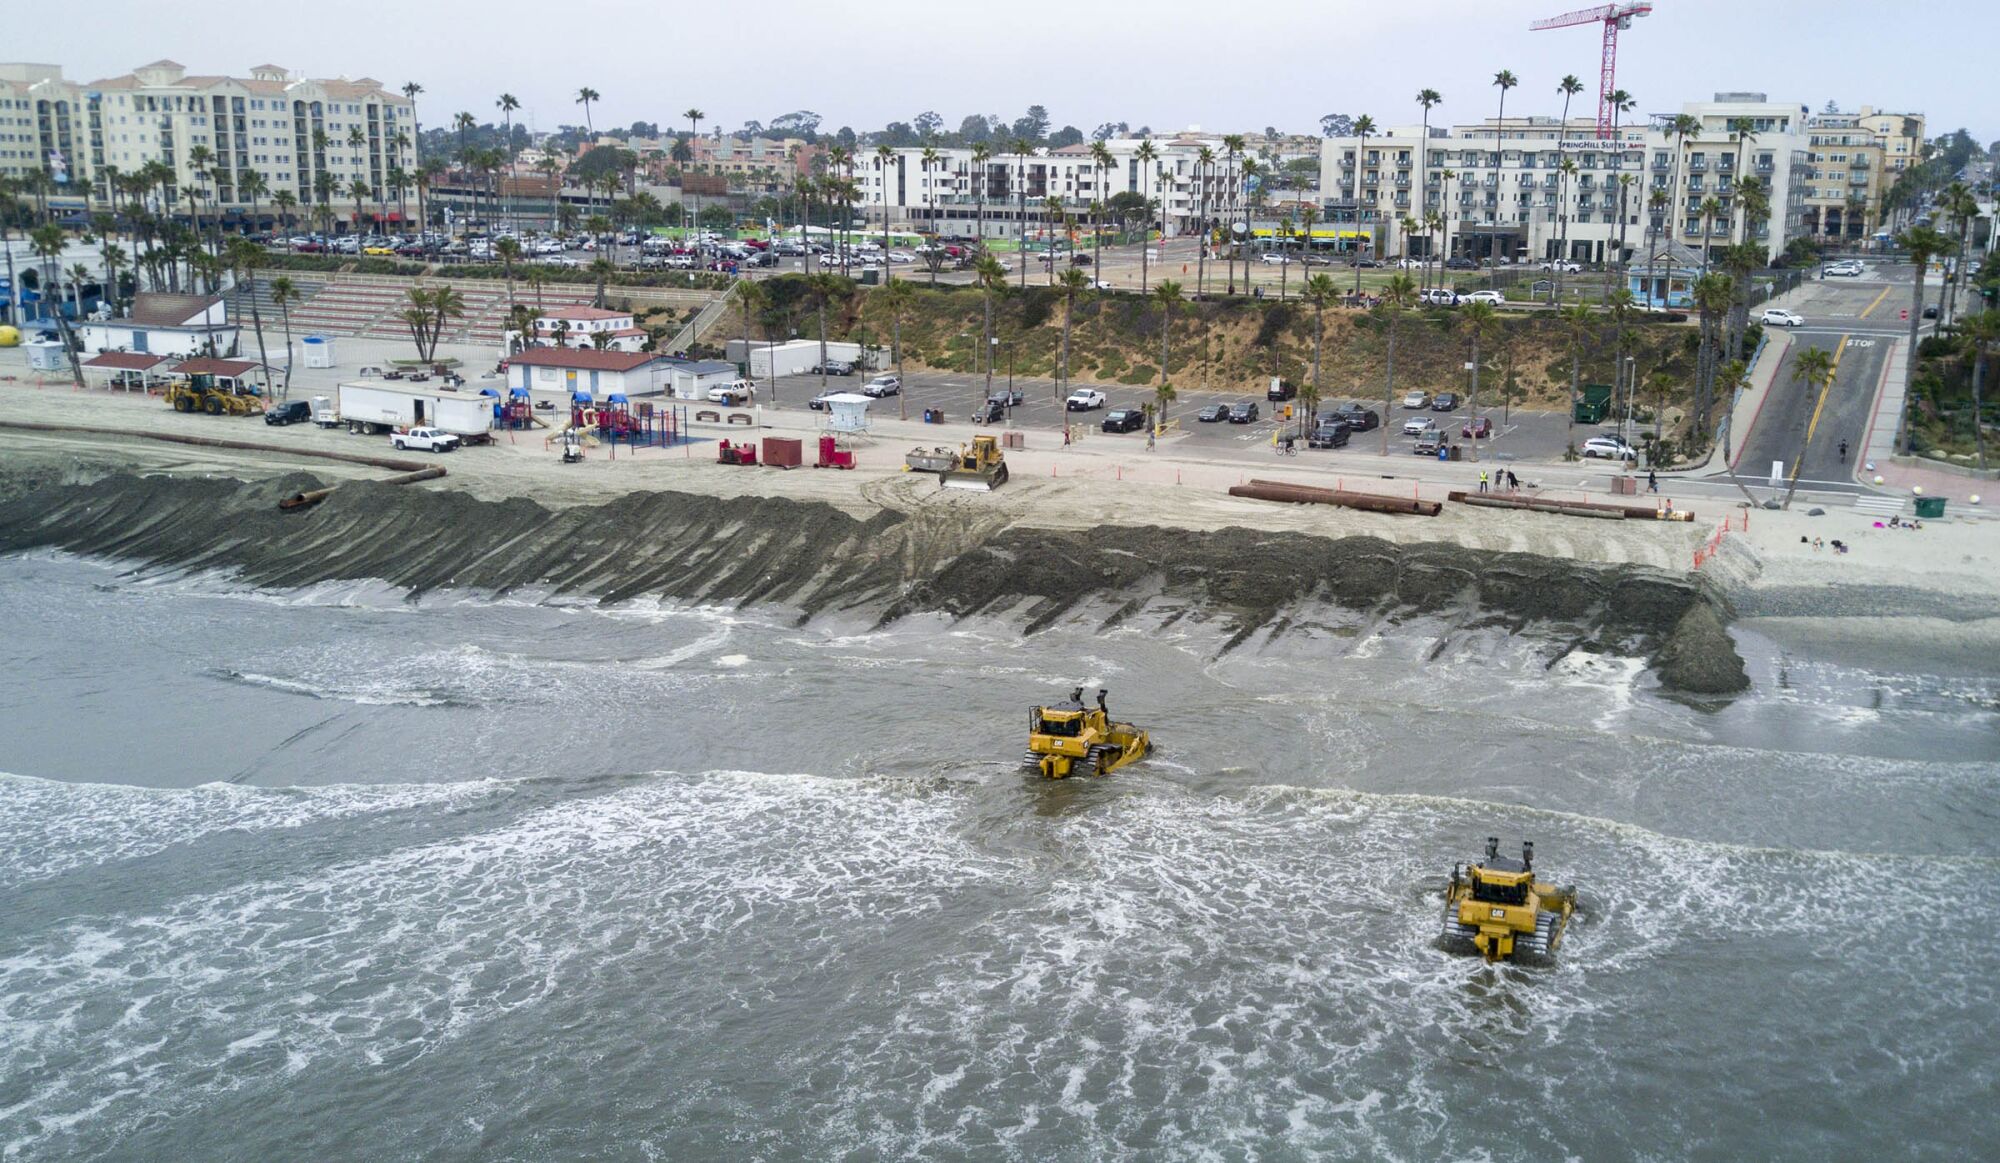 In May 2017, bulldozers pushed sand up onto the beach after it was pumped from the Oceanside harbor.